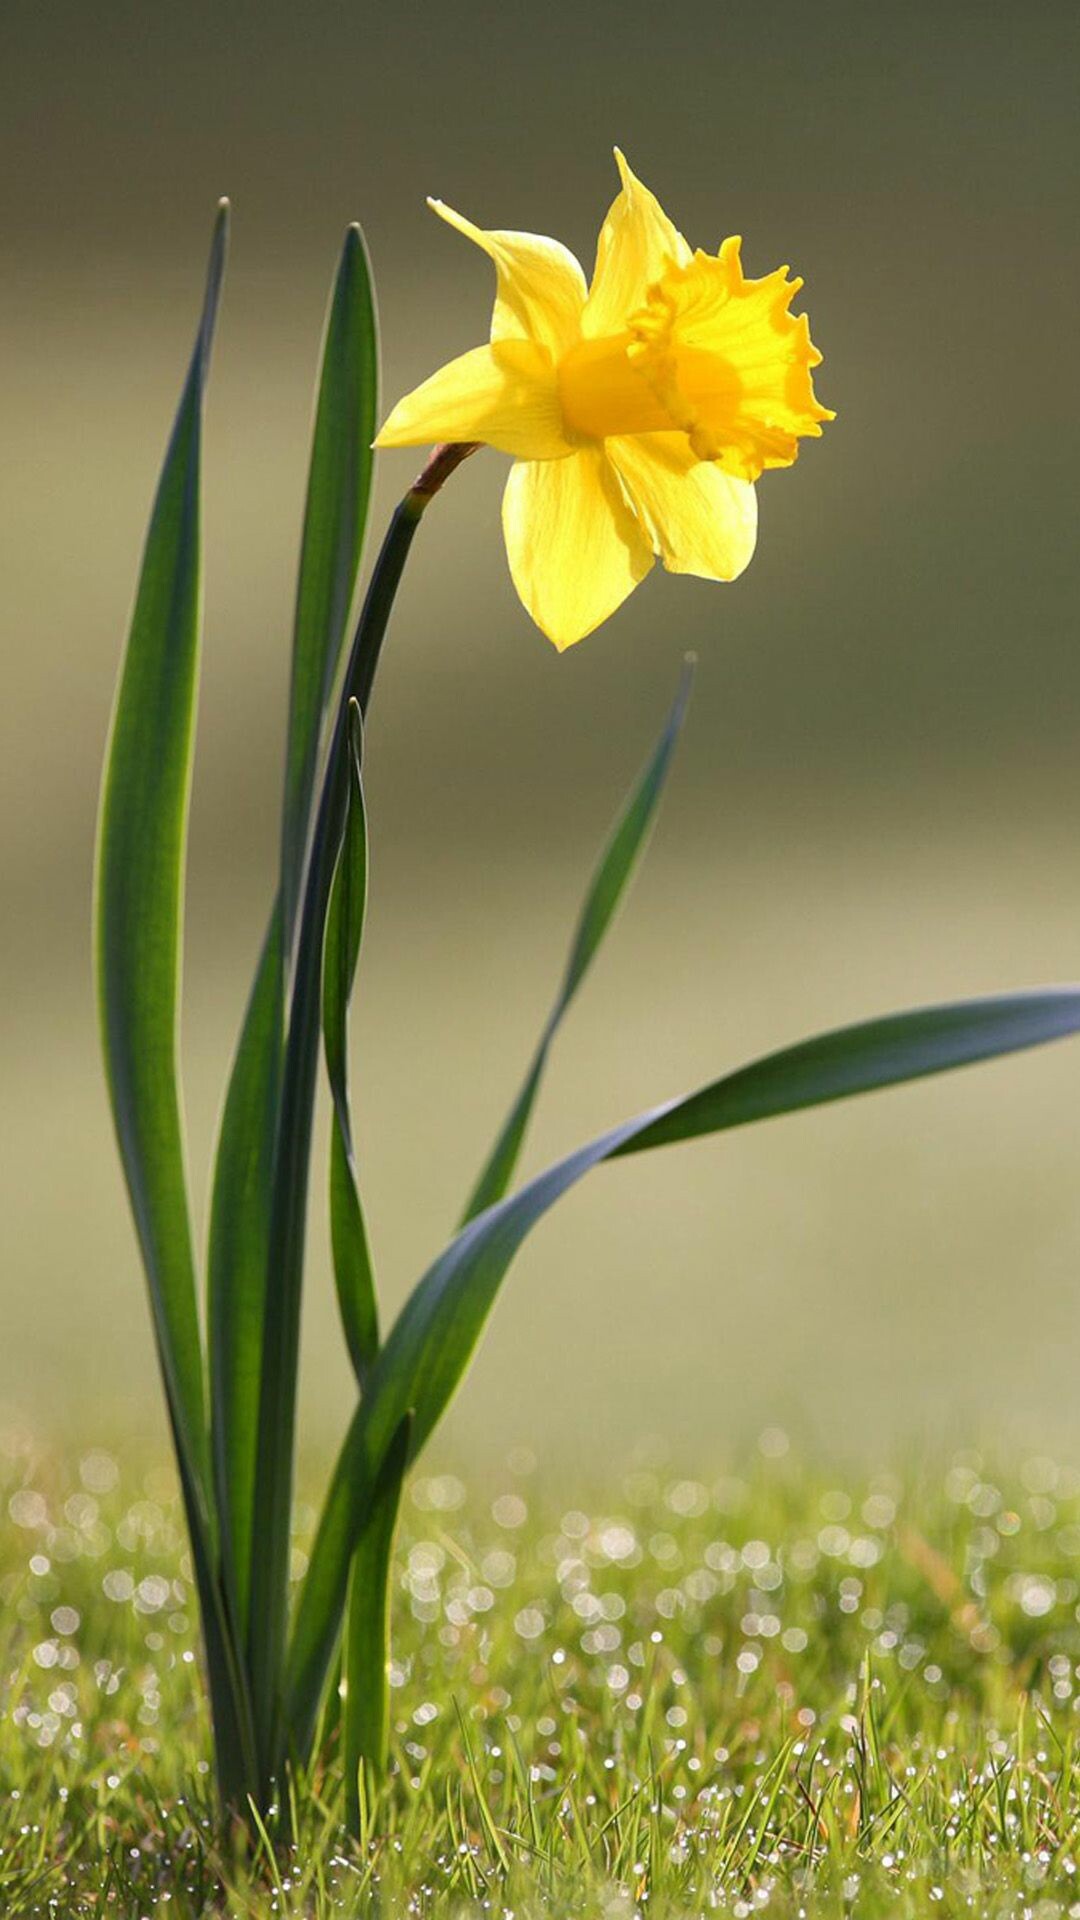 Daffodil: Narcissus, Herbaceous plant, Spring flower. 1080x1920 Full HD Wallpaper.